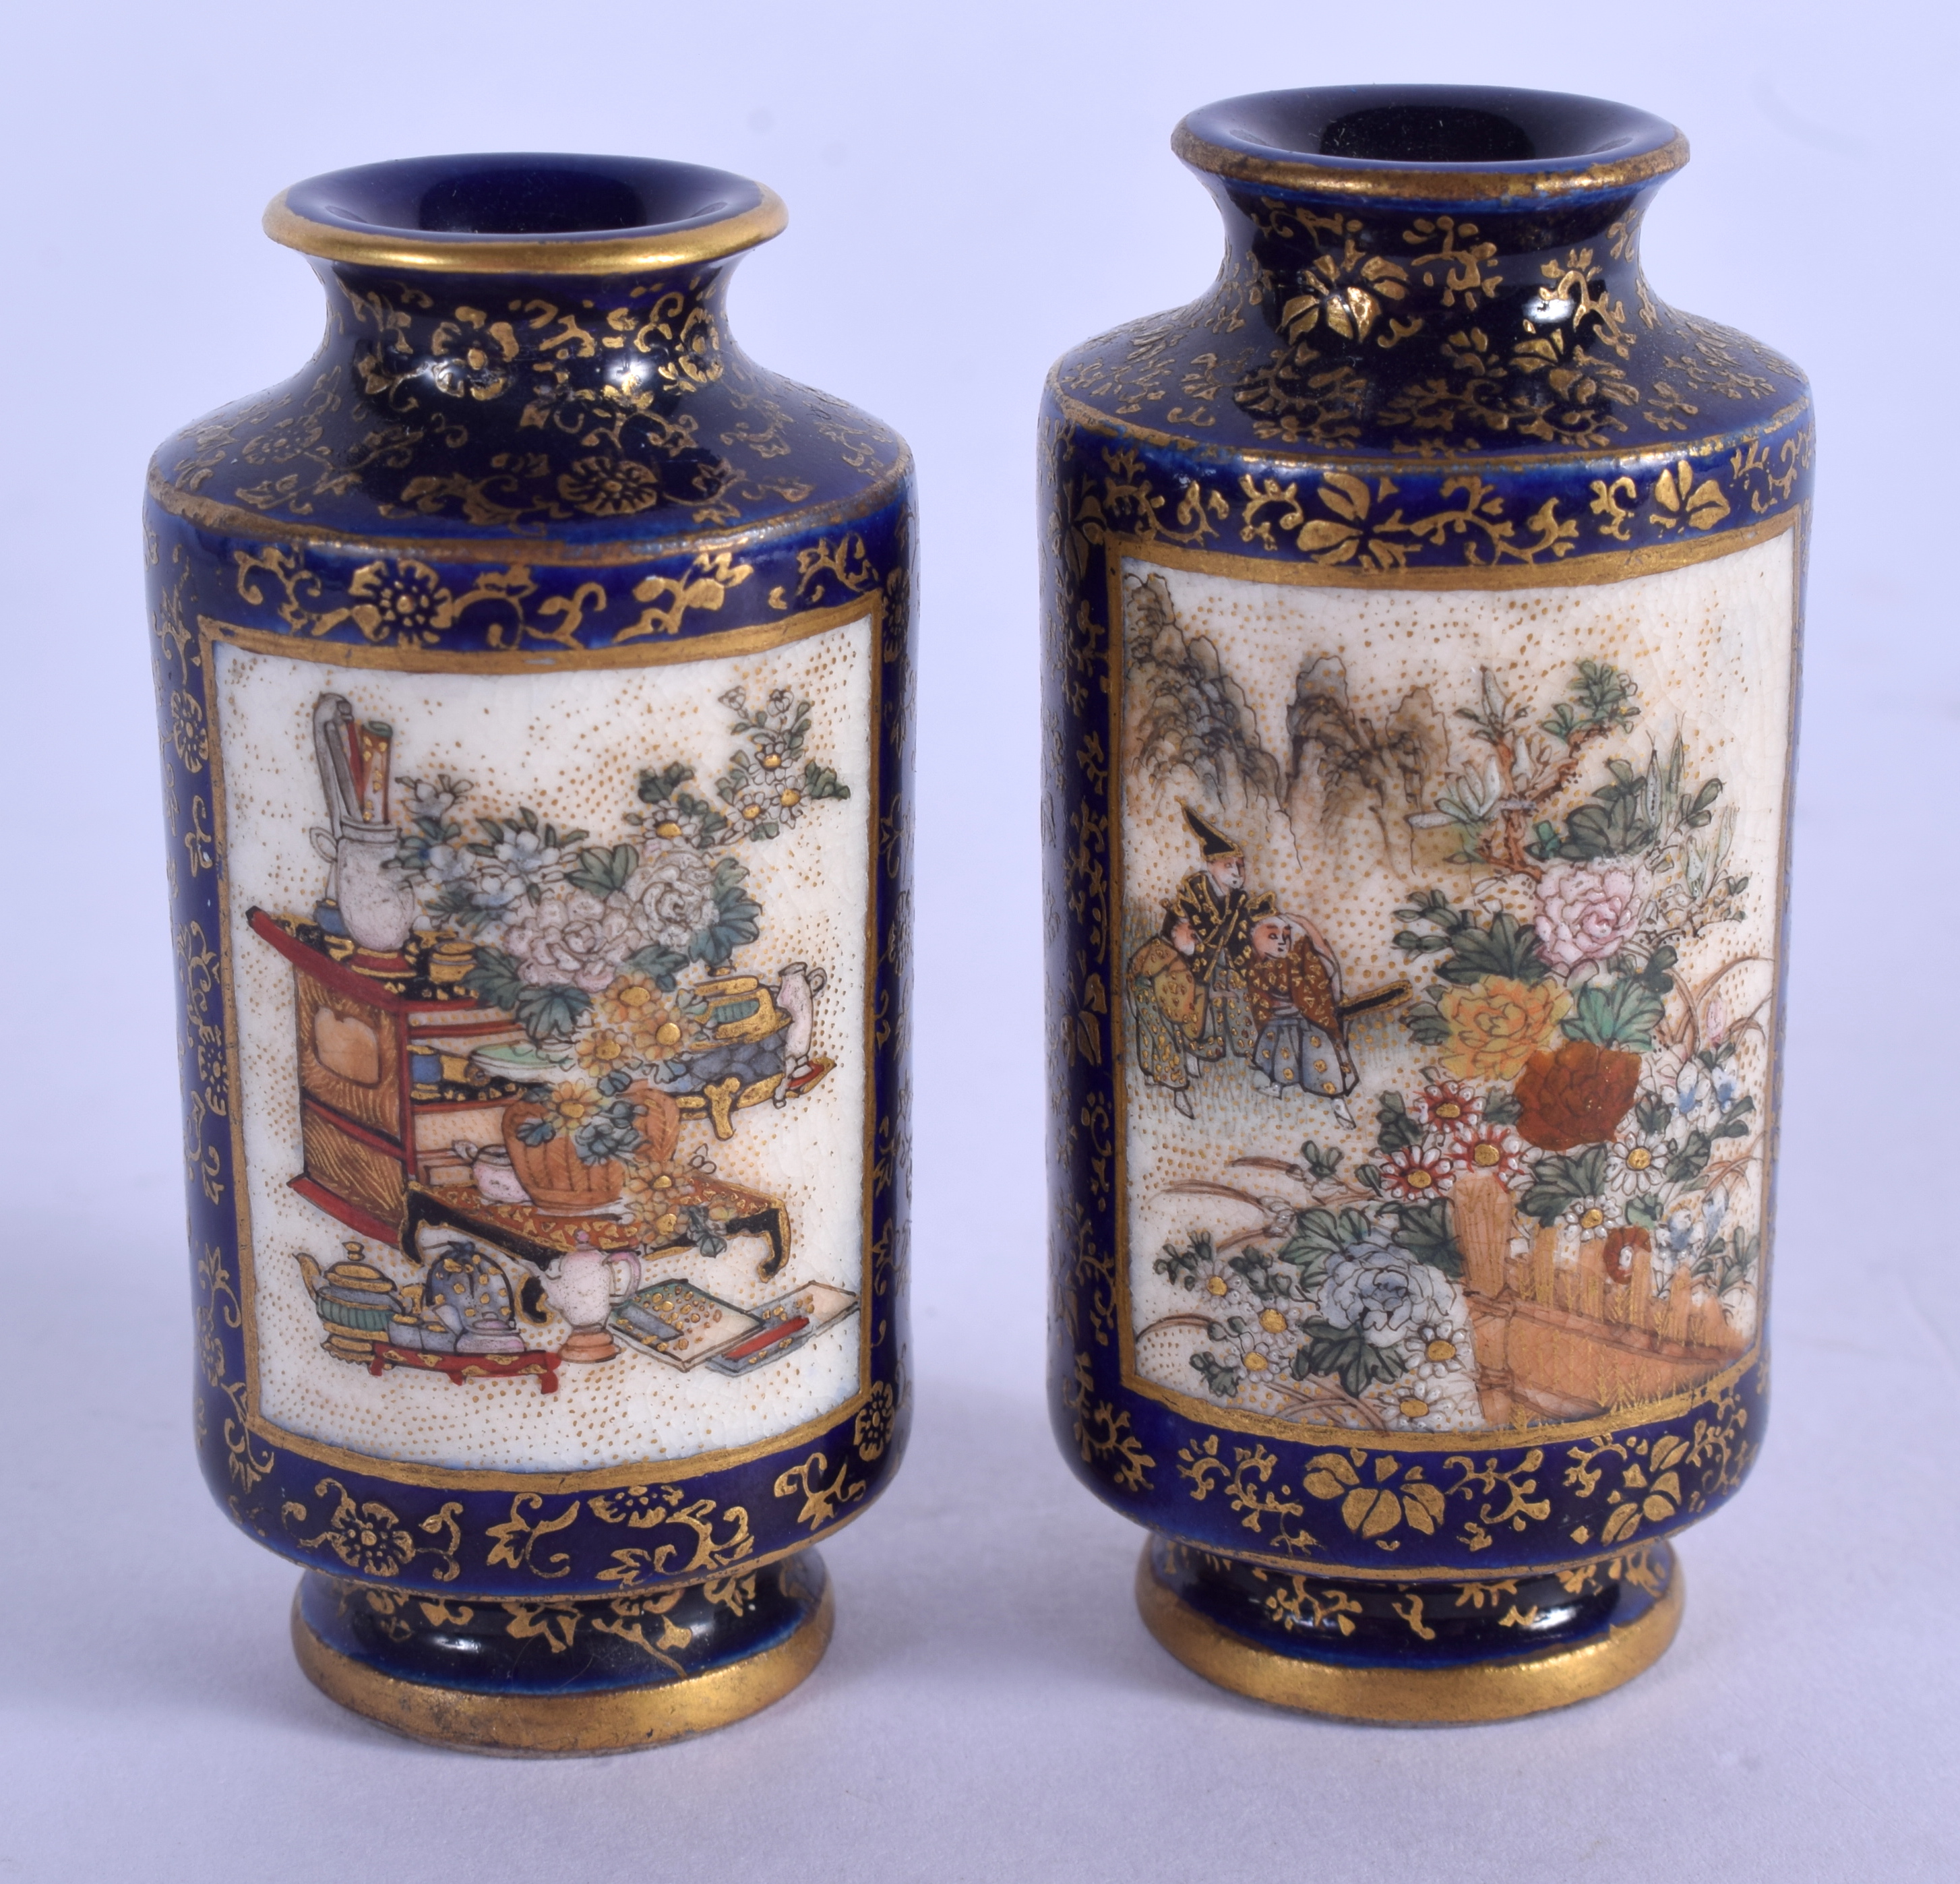 A FINE MINIATURE PAIR OF 19TH CENTURY JAPANESE MEIJI PERIOD SATSUMA VASES painted with figures. 6.75 - Image 2 of 4